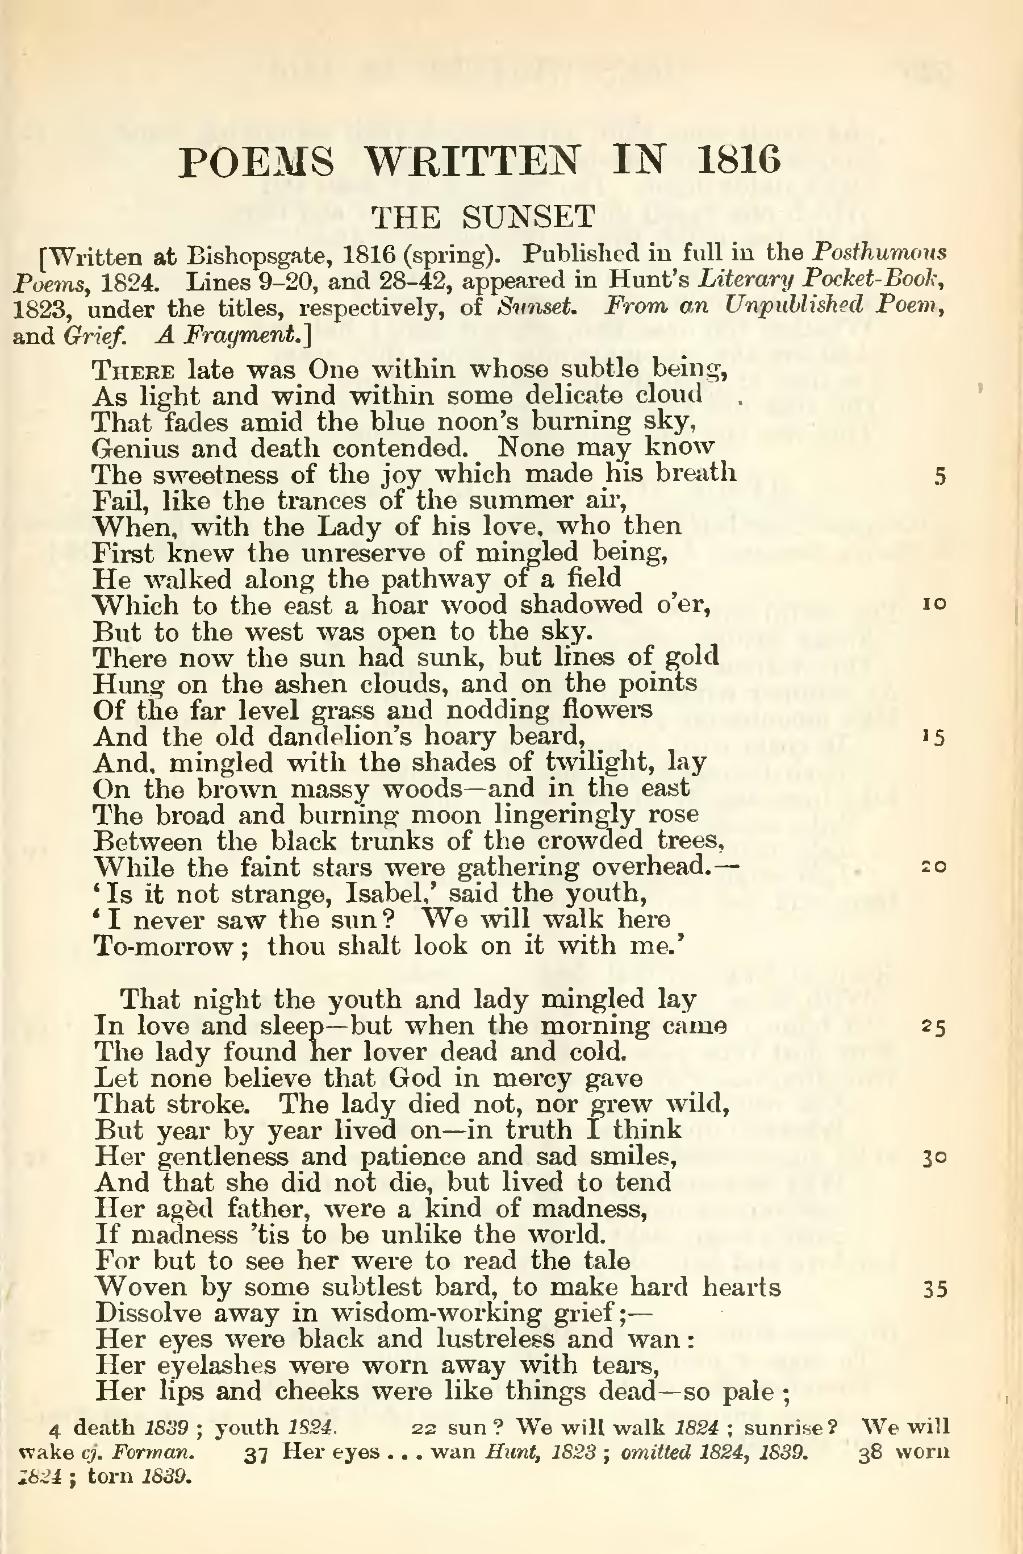 page555 1024px The plete poetical works of Percy Bysshe Shelley including materials never before printed in any edition of the poemsvu